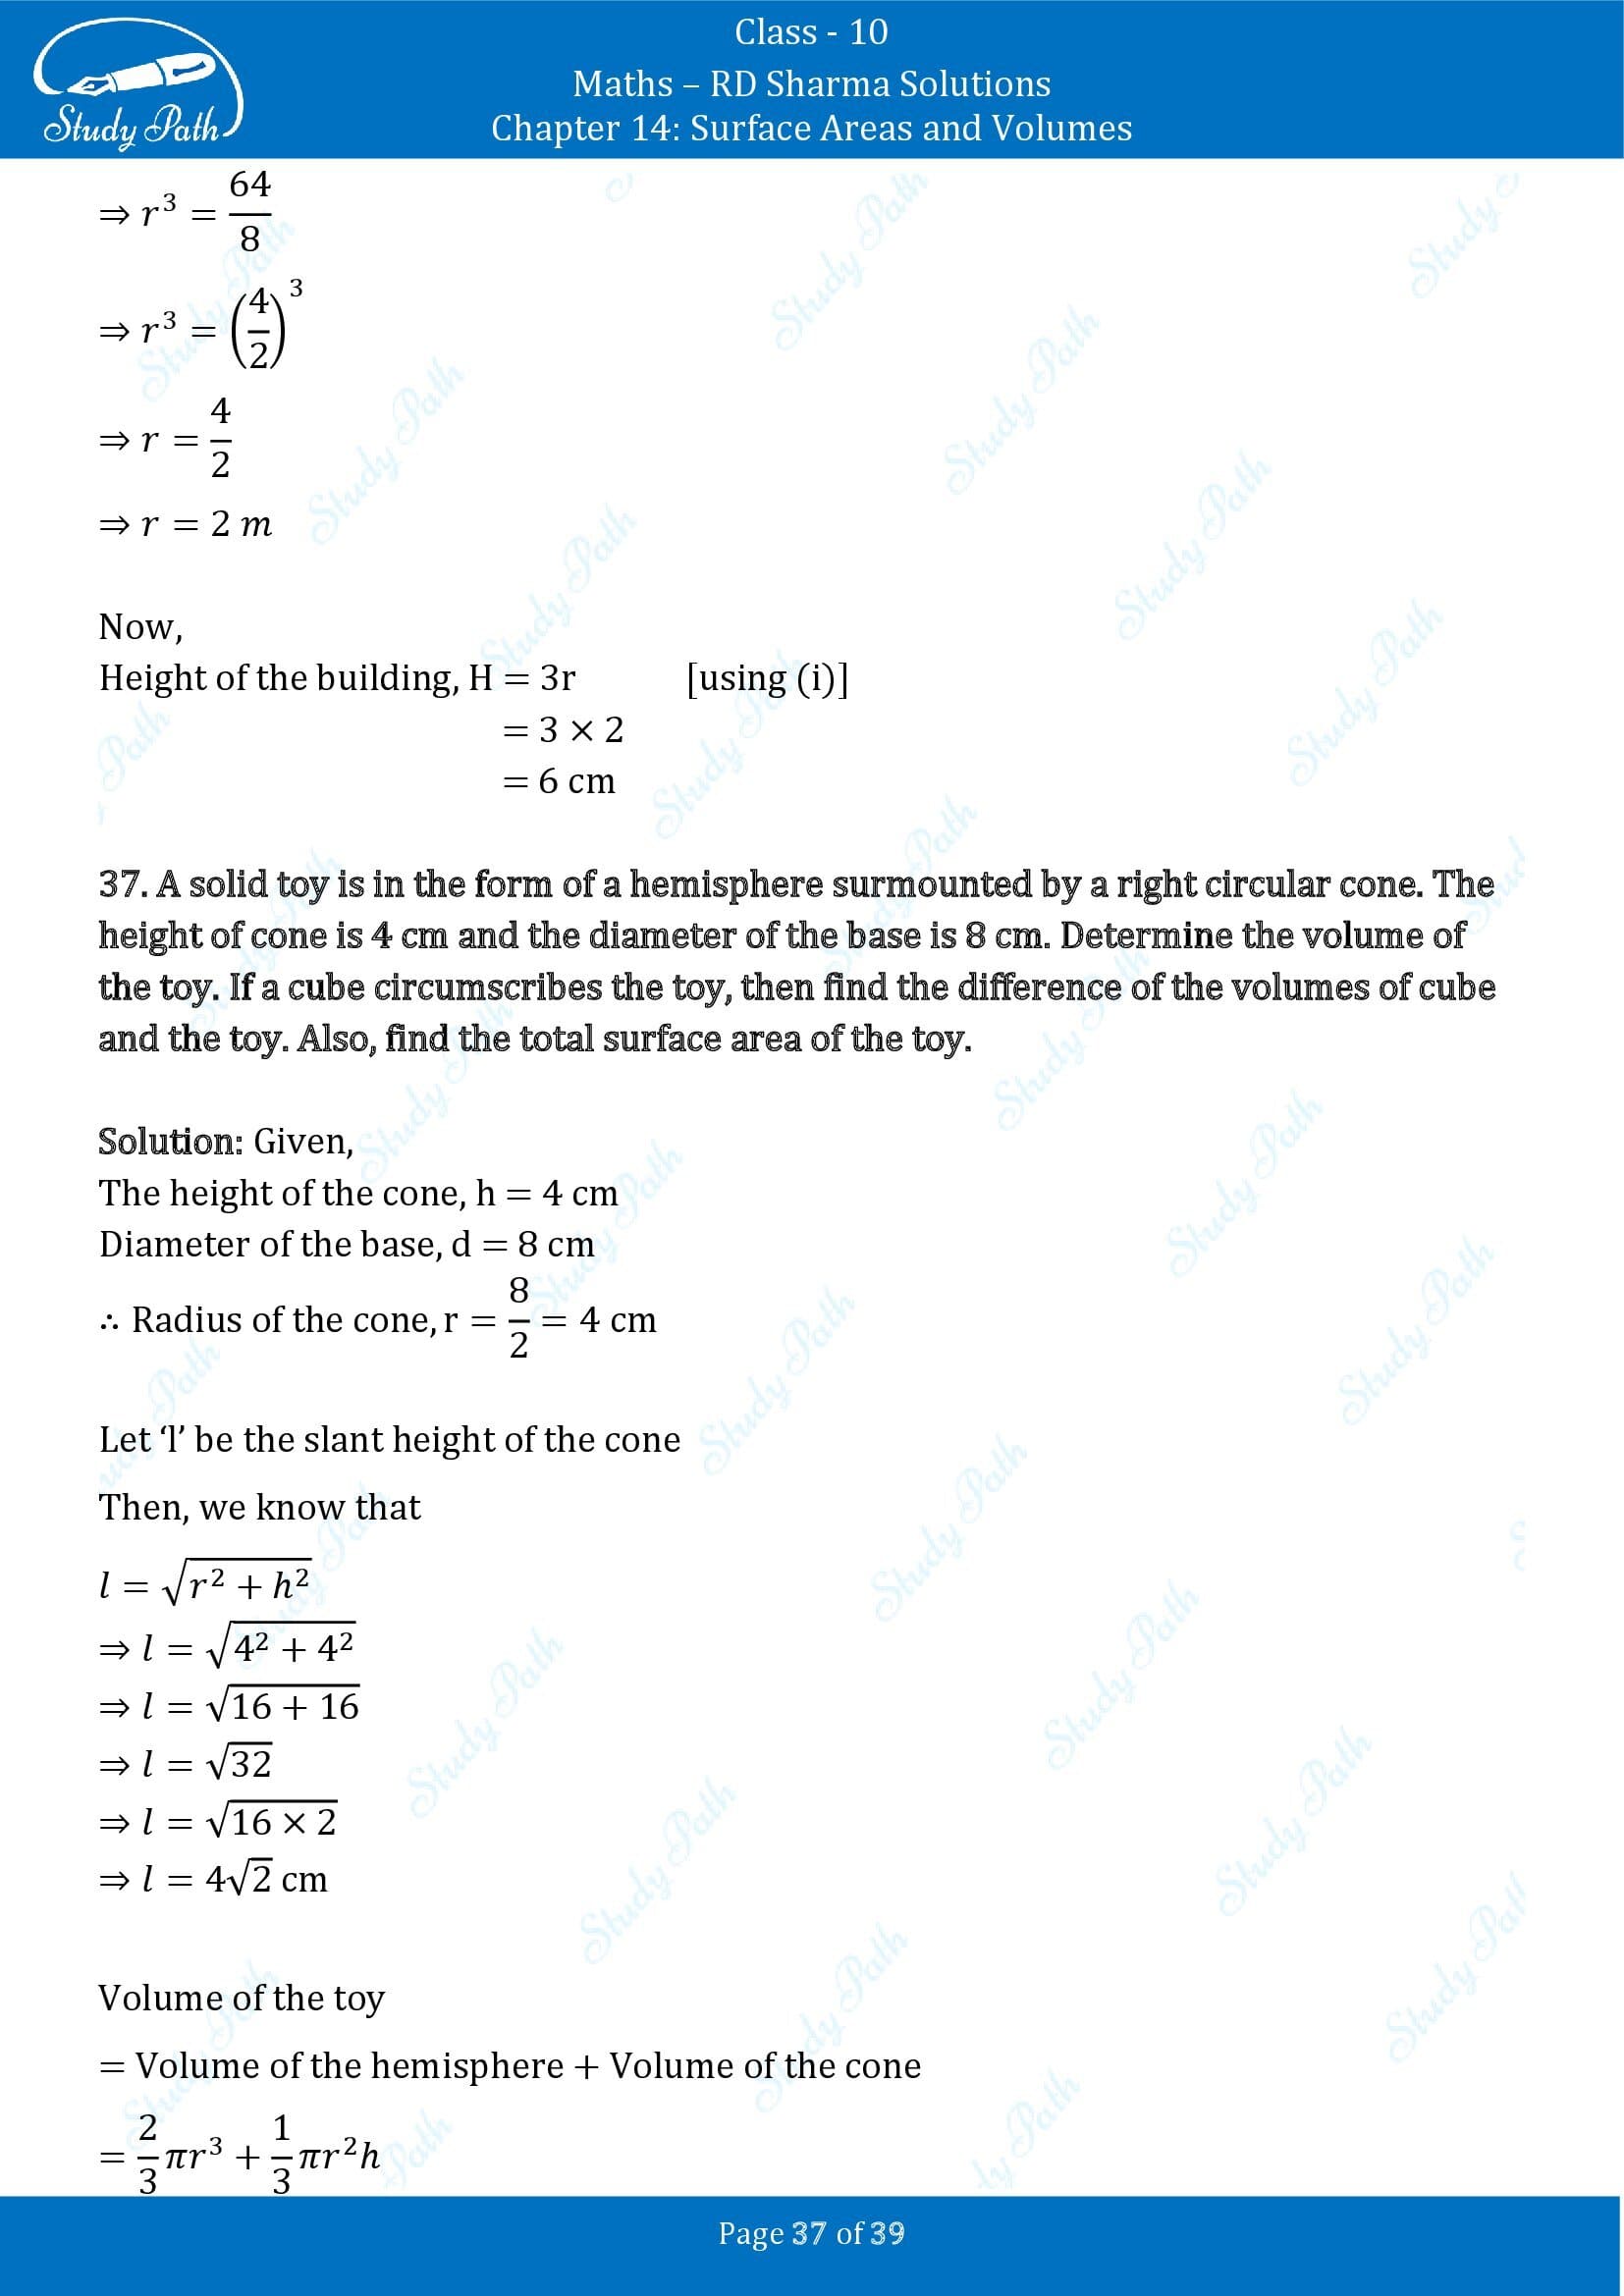 RD Sharma Solutions Class 10 Chapter 14 Surface Areas and Volumes Exercise 14.2 00037